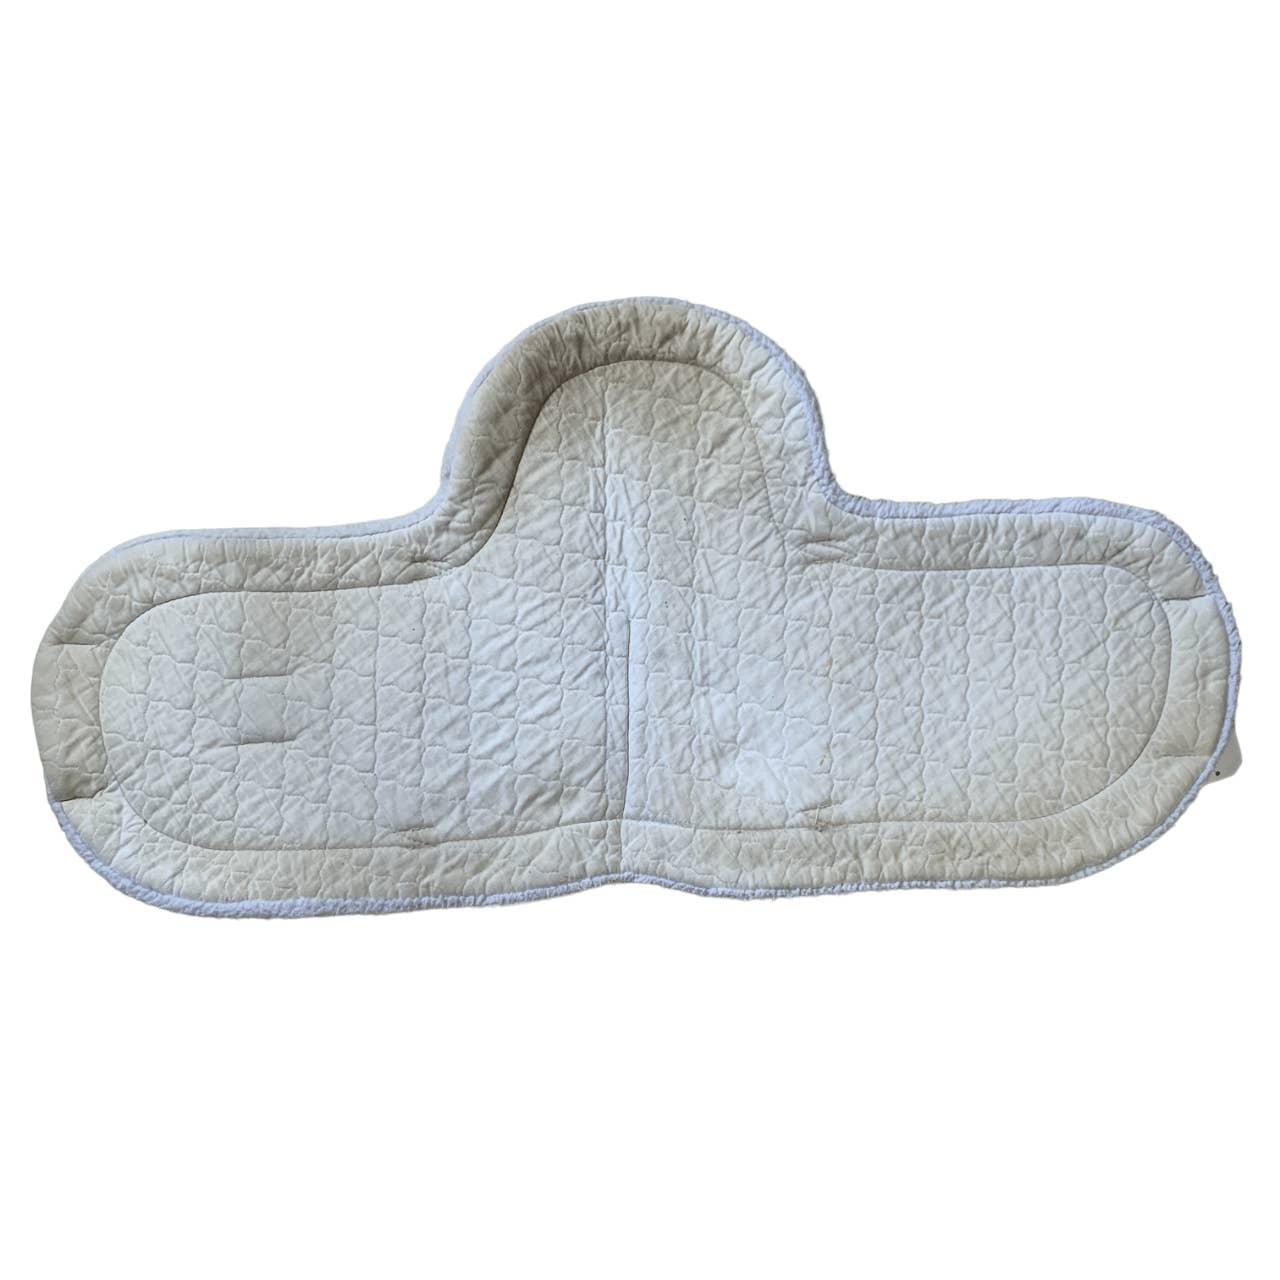 Toklat 'SuperQuilt High Profile' Long Dressage Pad in White - Full